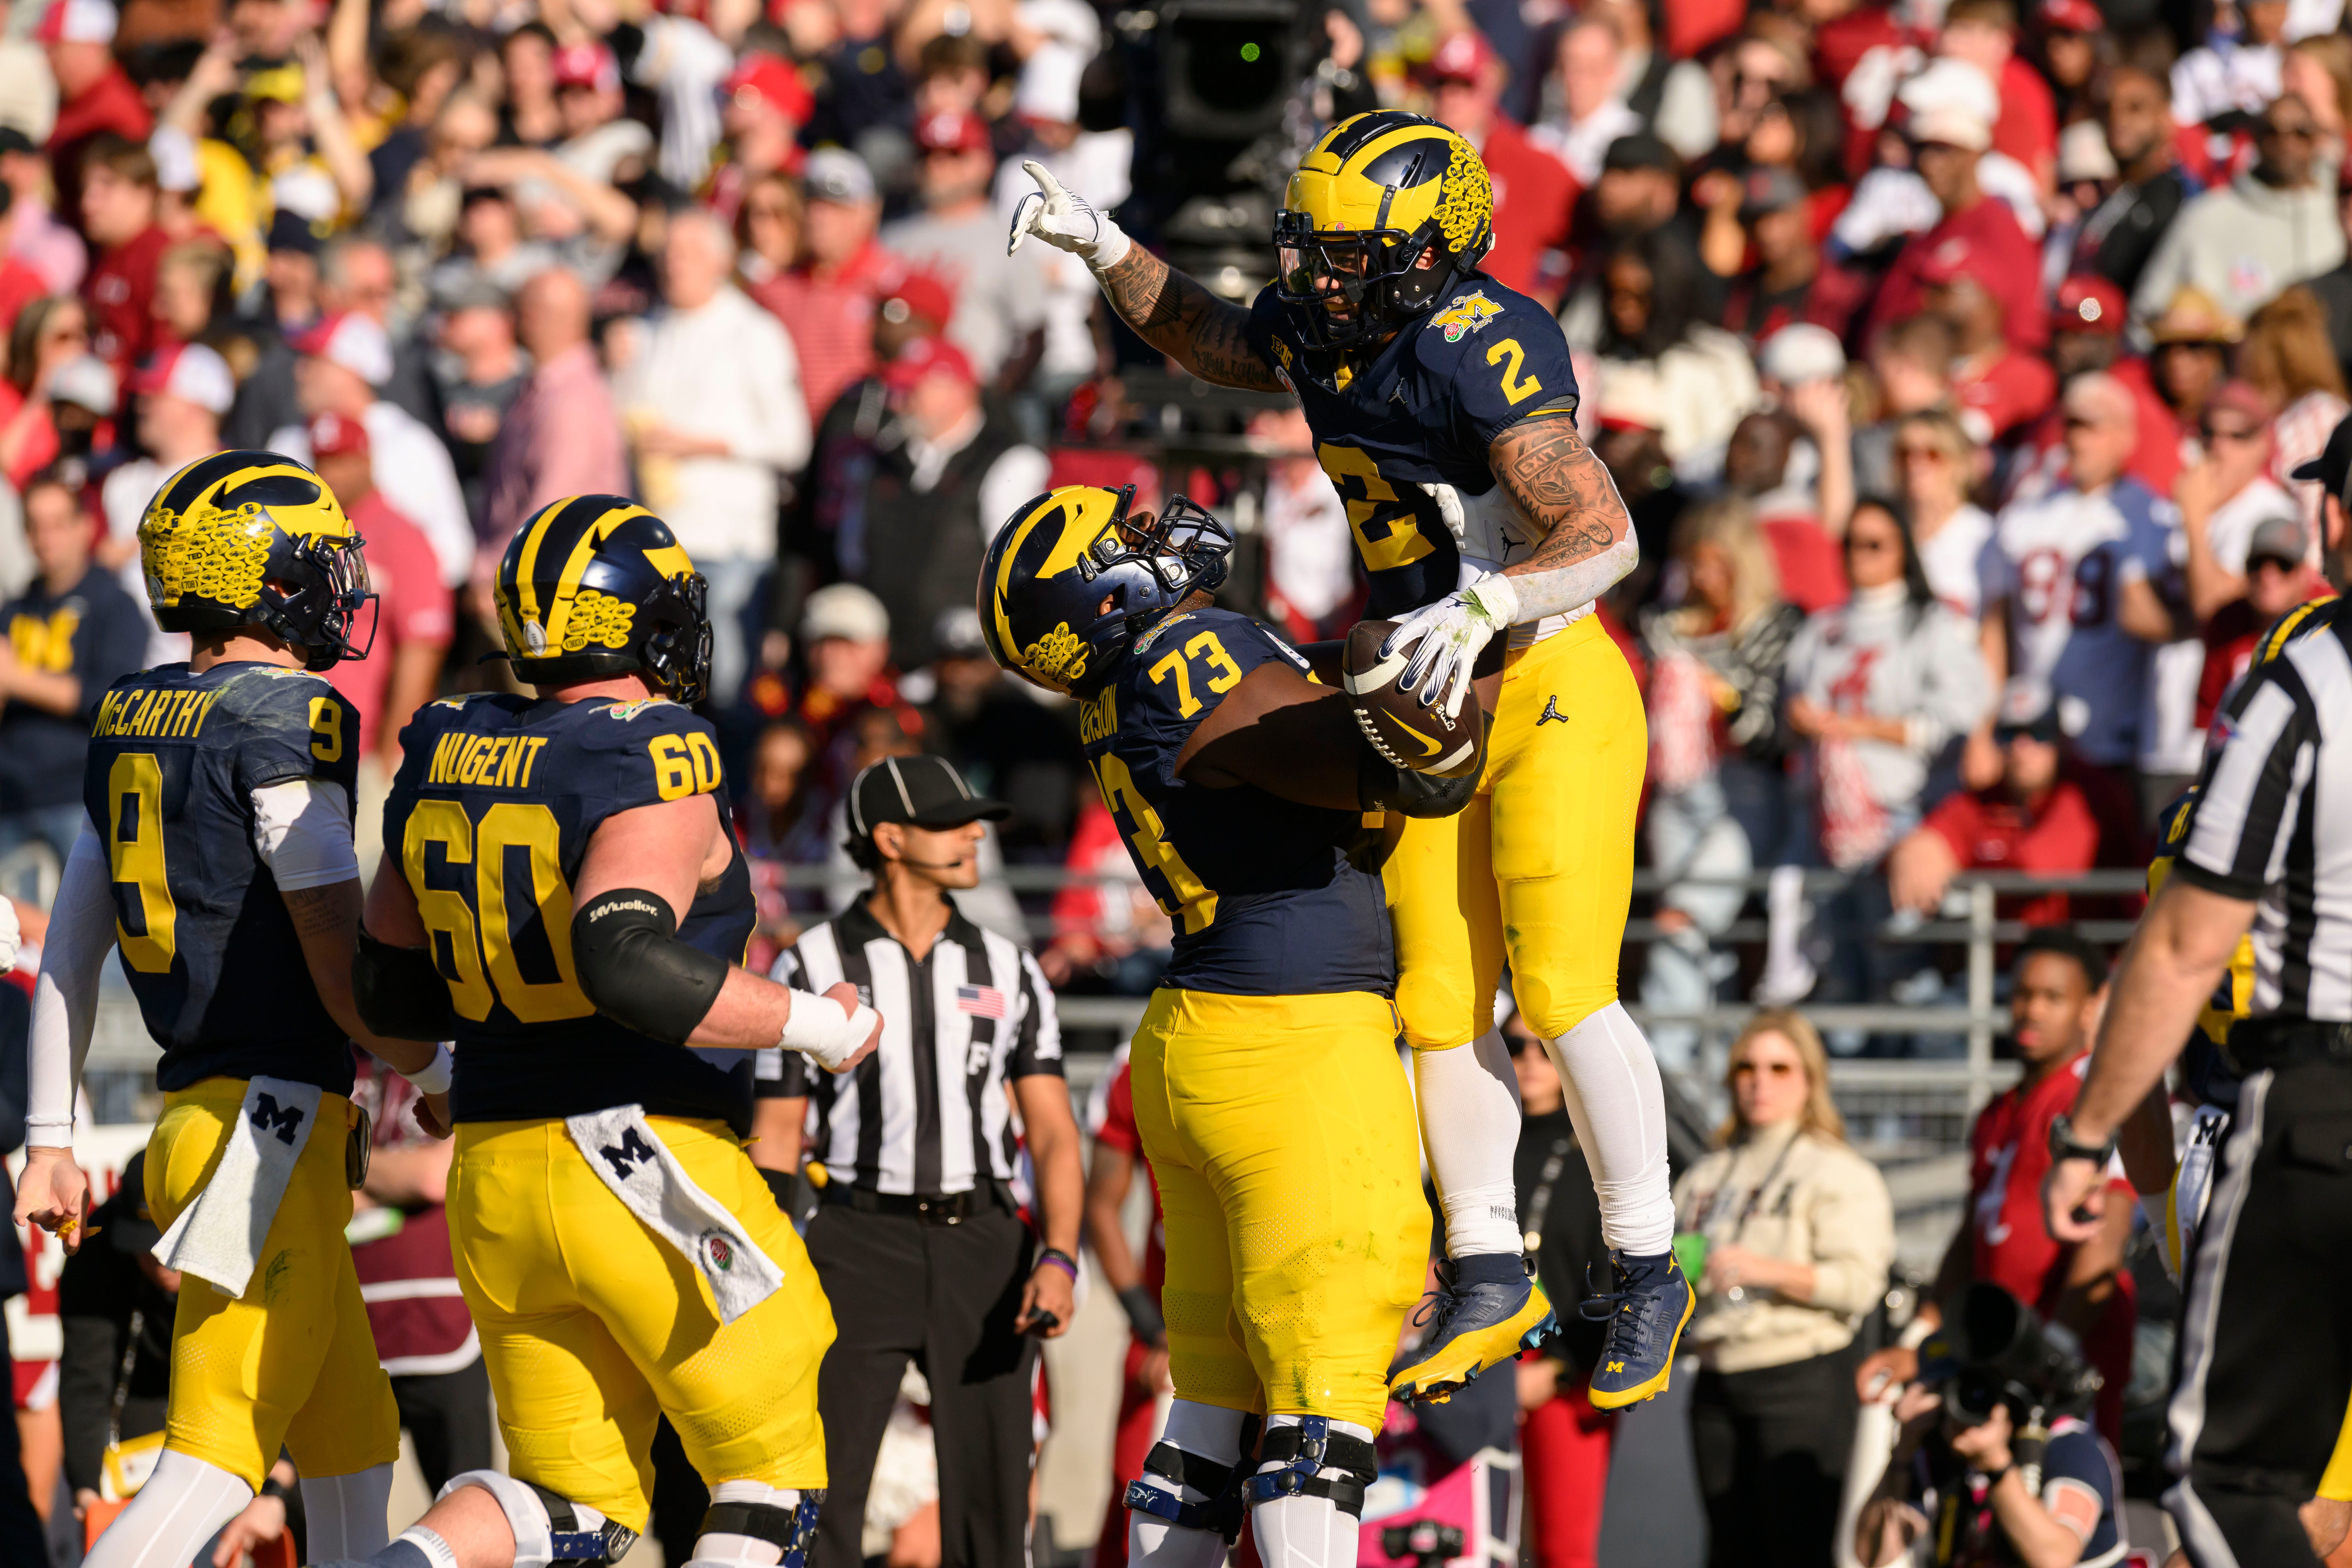 Michigan running back Blake Corum is lifted into the air by offensive lineman LaDarius Henderson after scoring a touchdown during the first quarter of the Rose Bowl, in Pasadena, California, January 1, 2024.